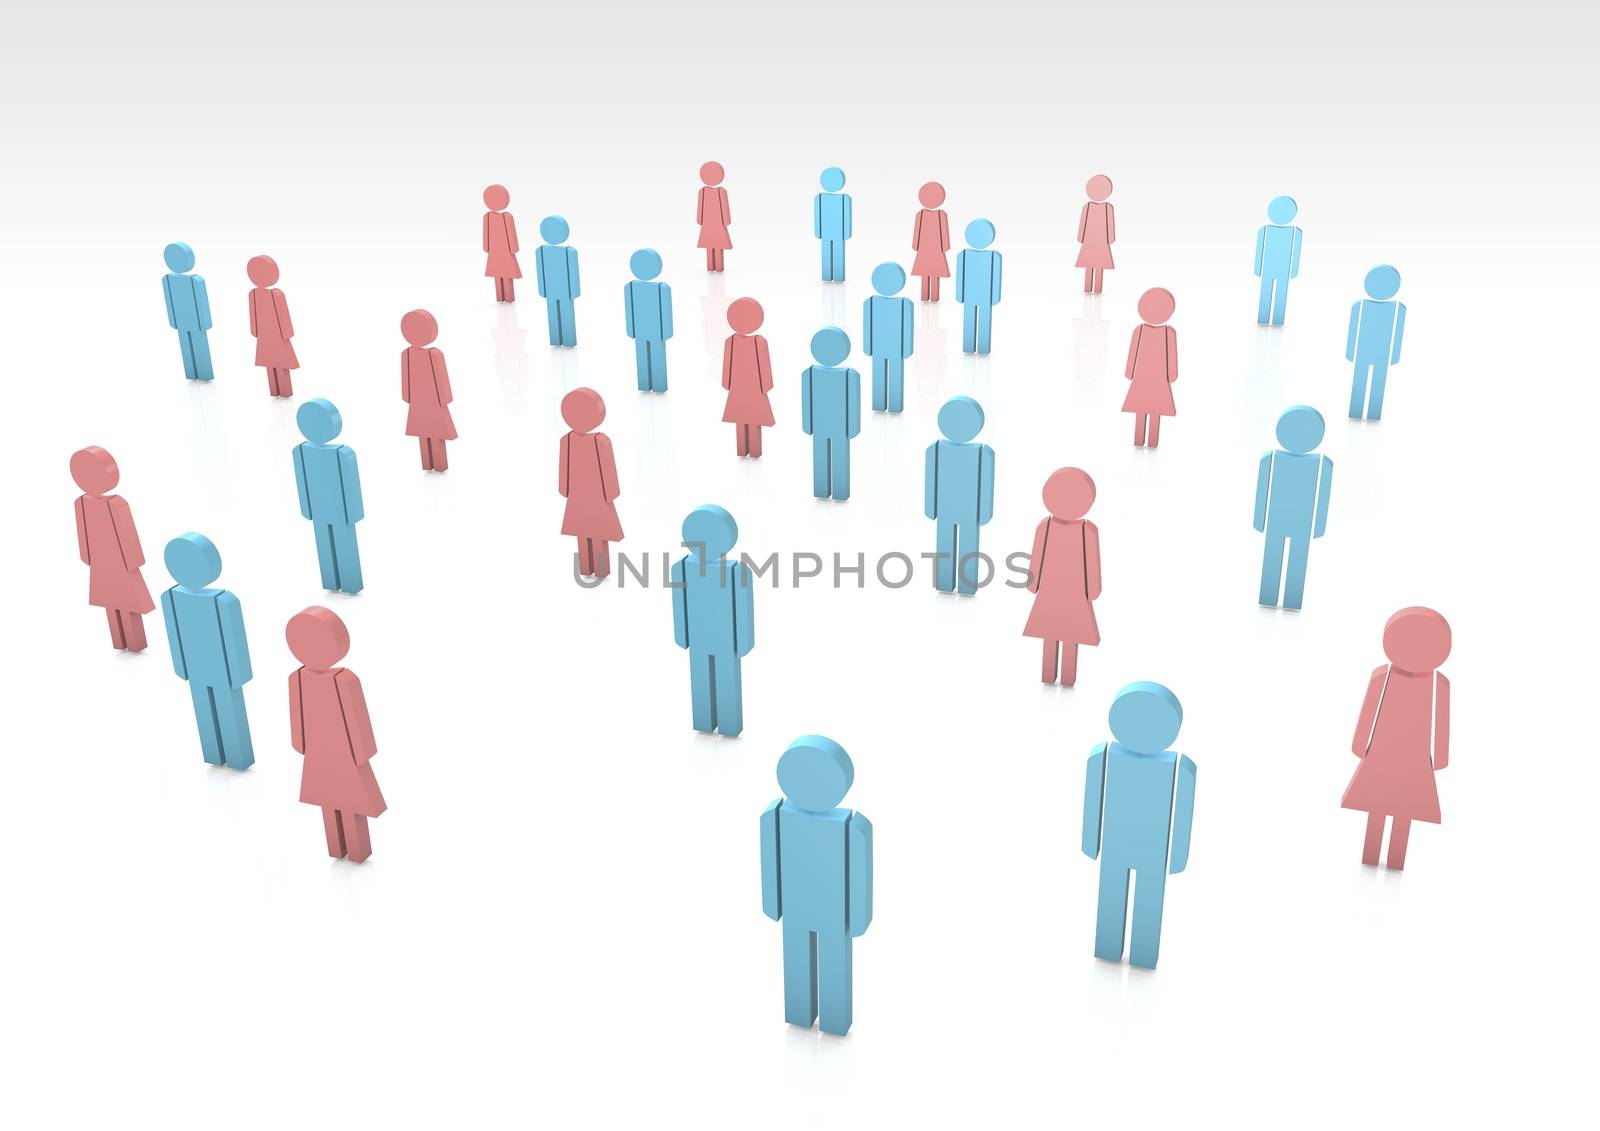 3D rendering of a group of distant man and women